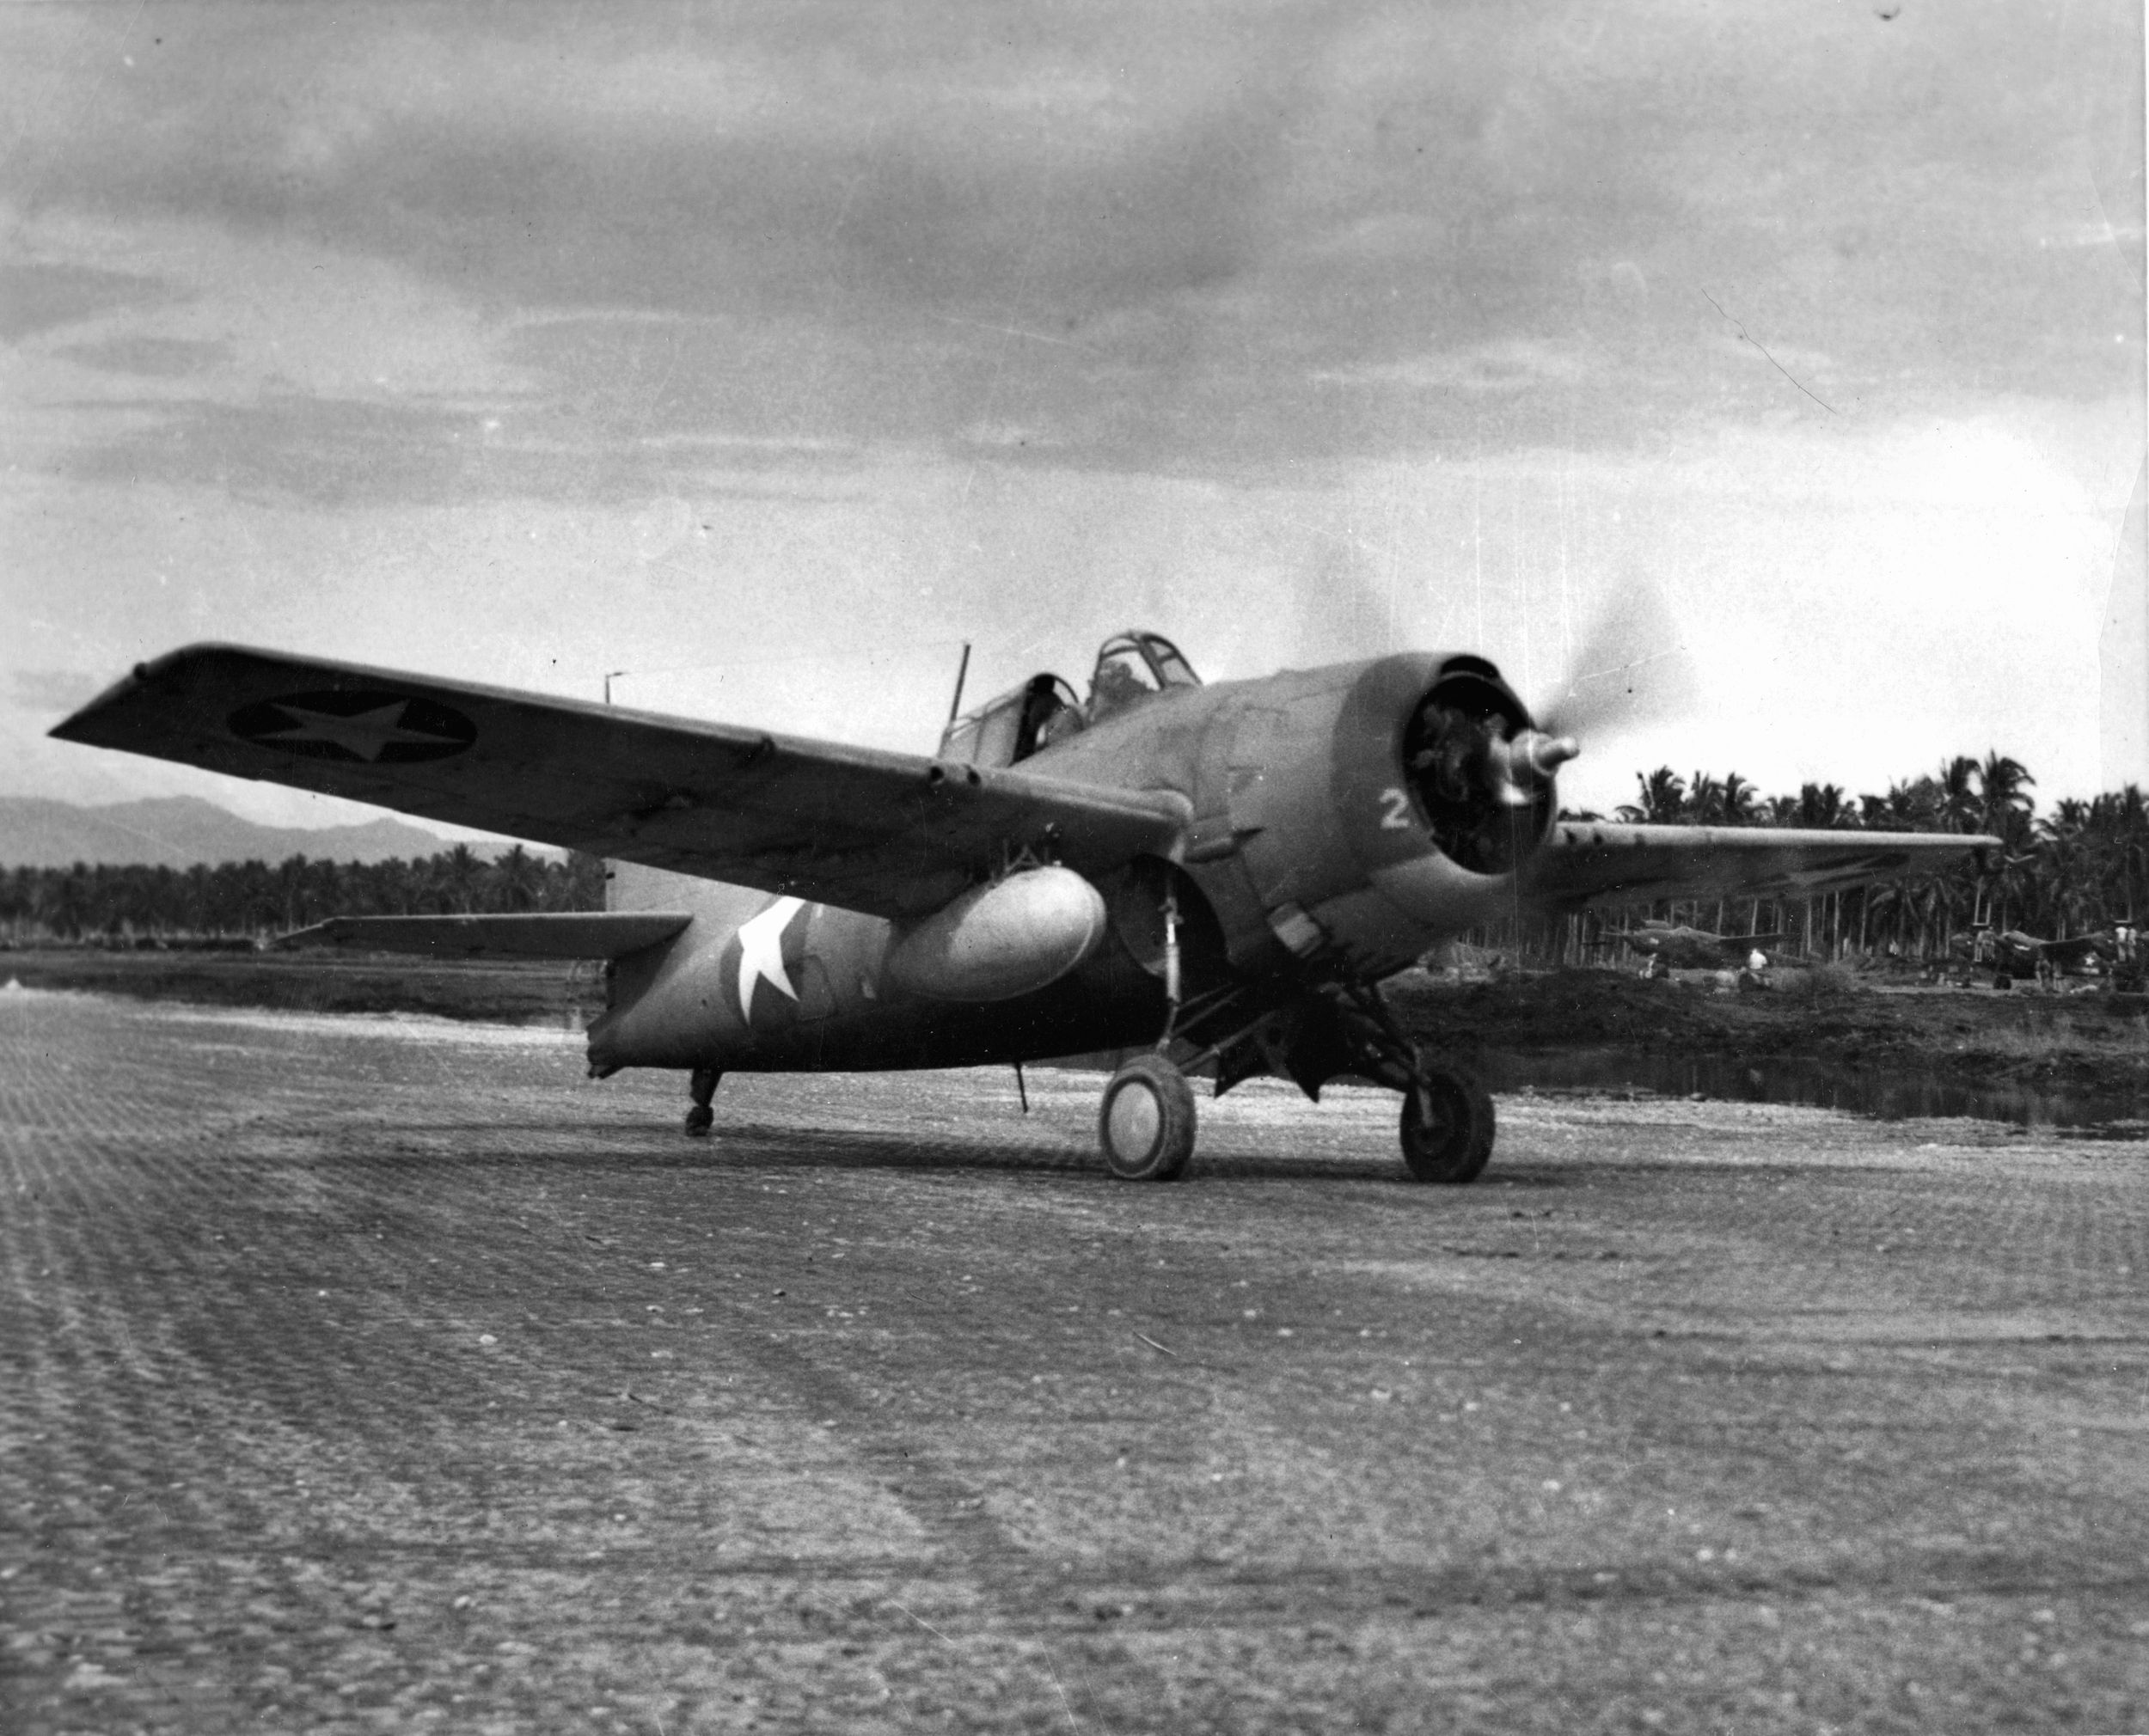 Taxiing on the runway at Henderson Field on Guadalcanal, this Grumman F4F Wildcat fighter has just landed after arriving from an aircraft carrier. The external fuel tank attached to the right wing extended the fighter’s range.